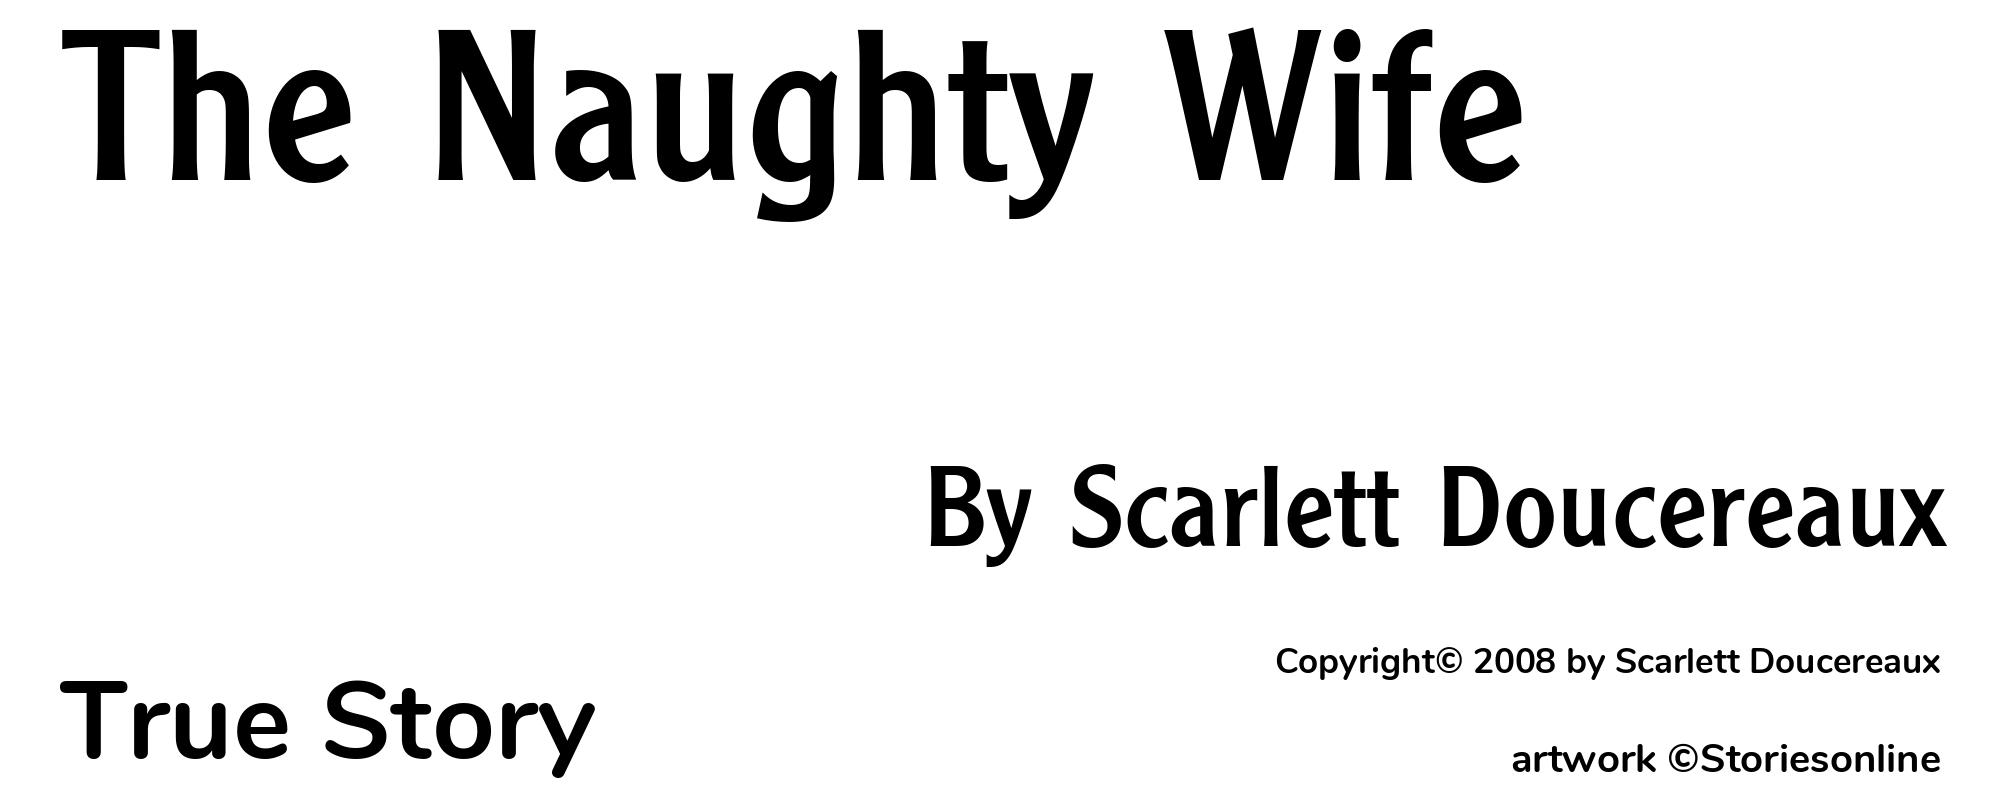 The Naughty Wife - Cover